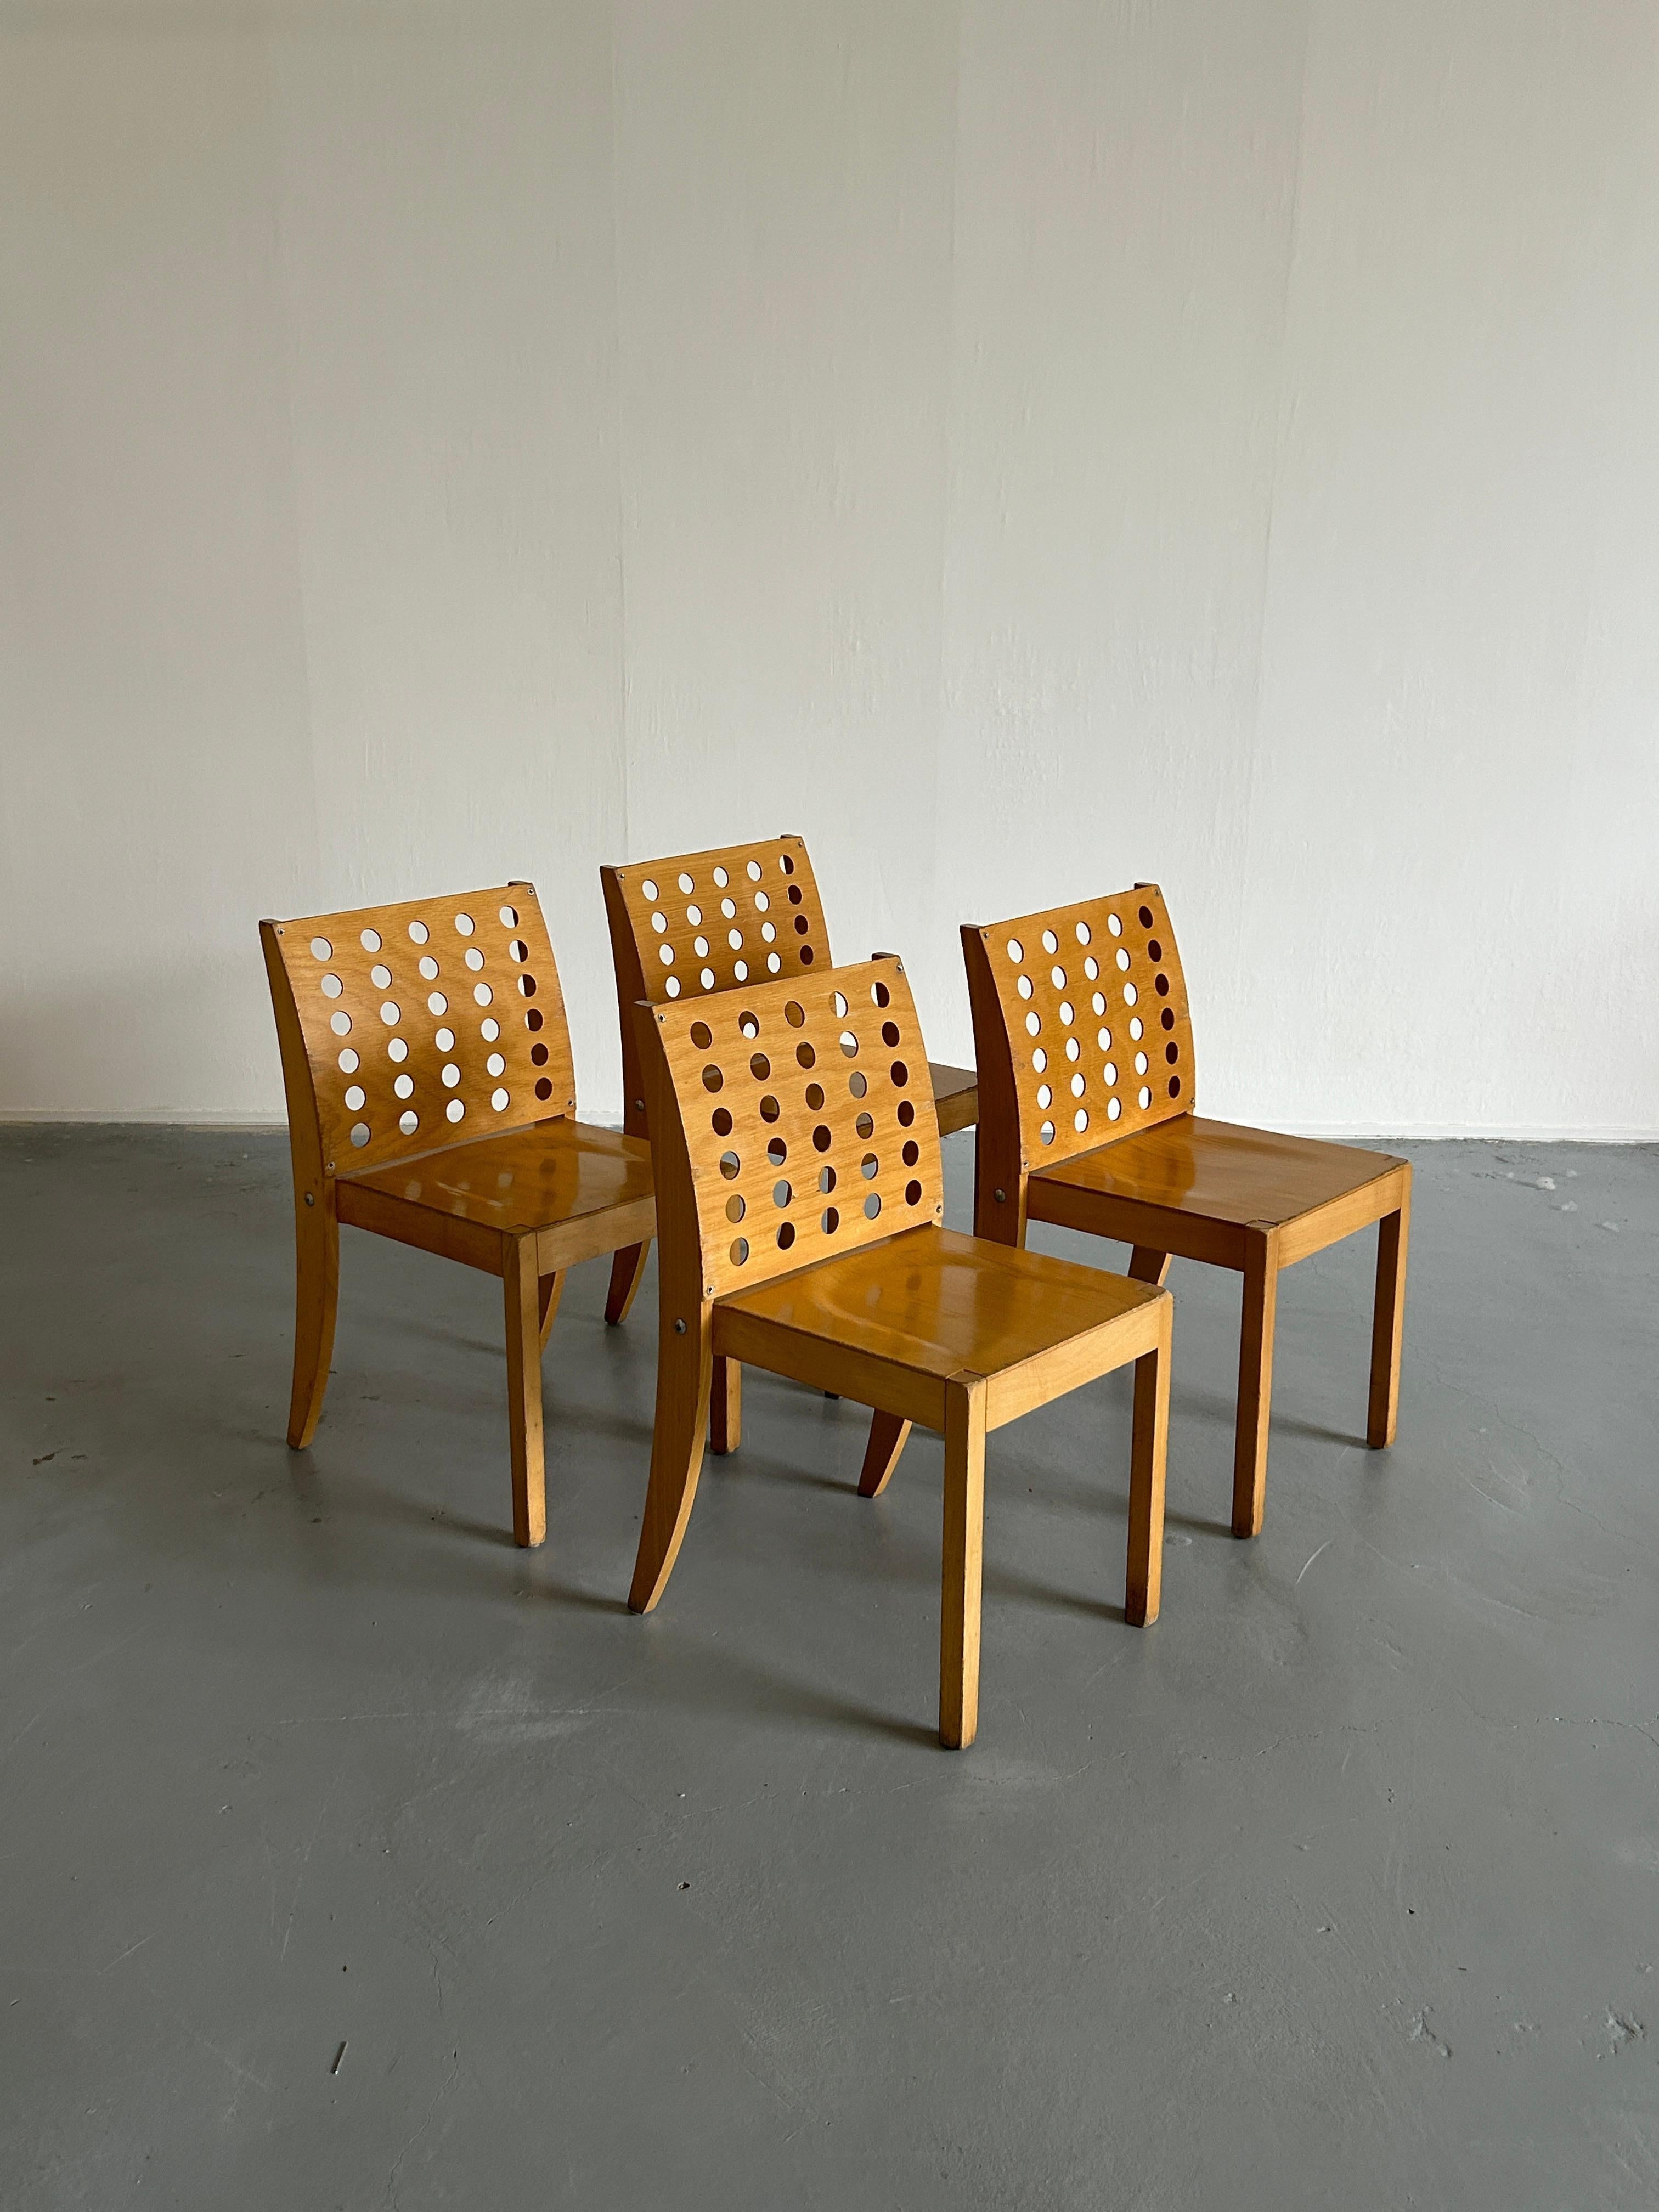 A set of four beautiful vintage and original Thonet S471 chairs, designed by Christoph Zschocke and produced during the 1990s in Germany.
Similar to the style of Roland Rainer.

Lightweight, practical and versatile.

Overall, the chairs are